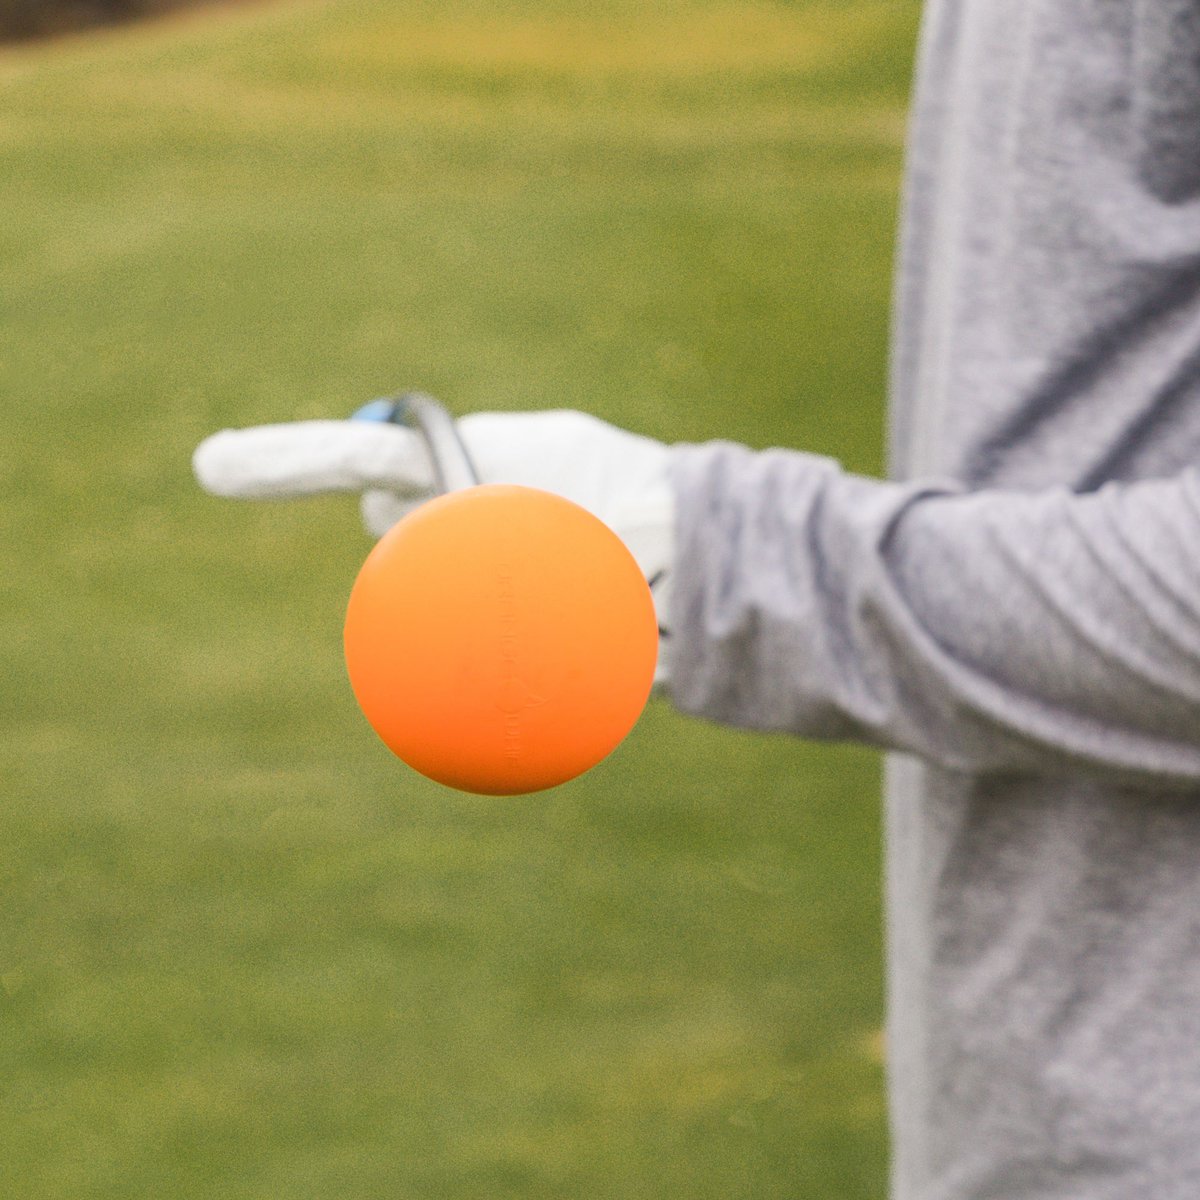 The counterweight is an essential part of the Orange Whip patented, counterweight swing system. The counterweight balances the Orange Whip Swing Trainers, and stabilizes and balances your swing from setup to finish. #golfswing #golftraining